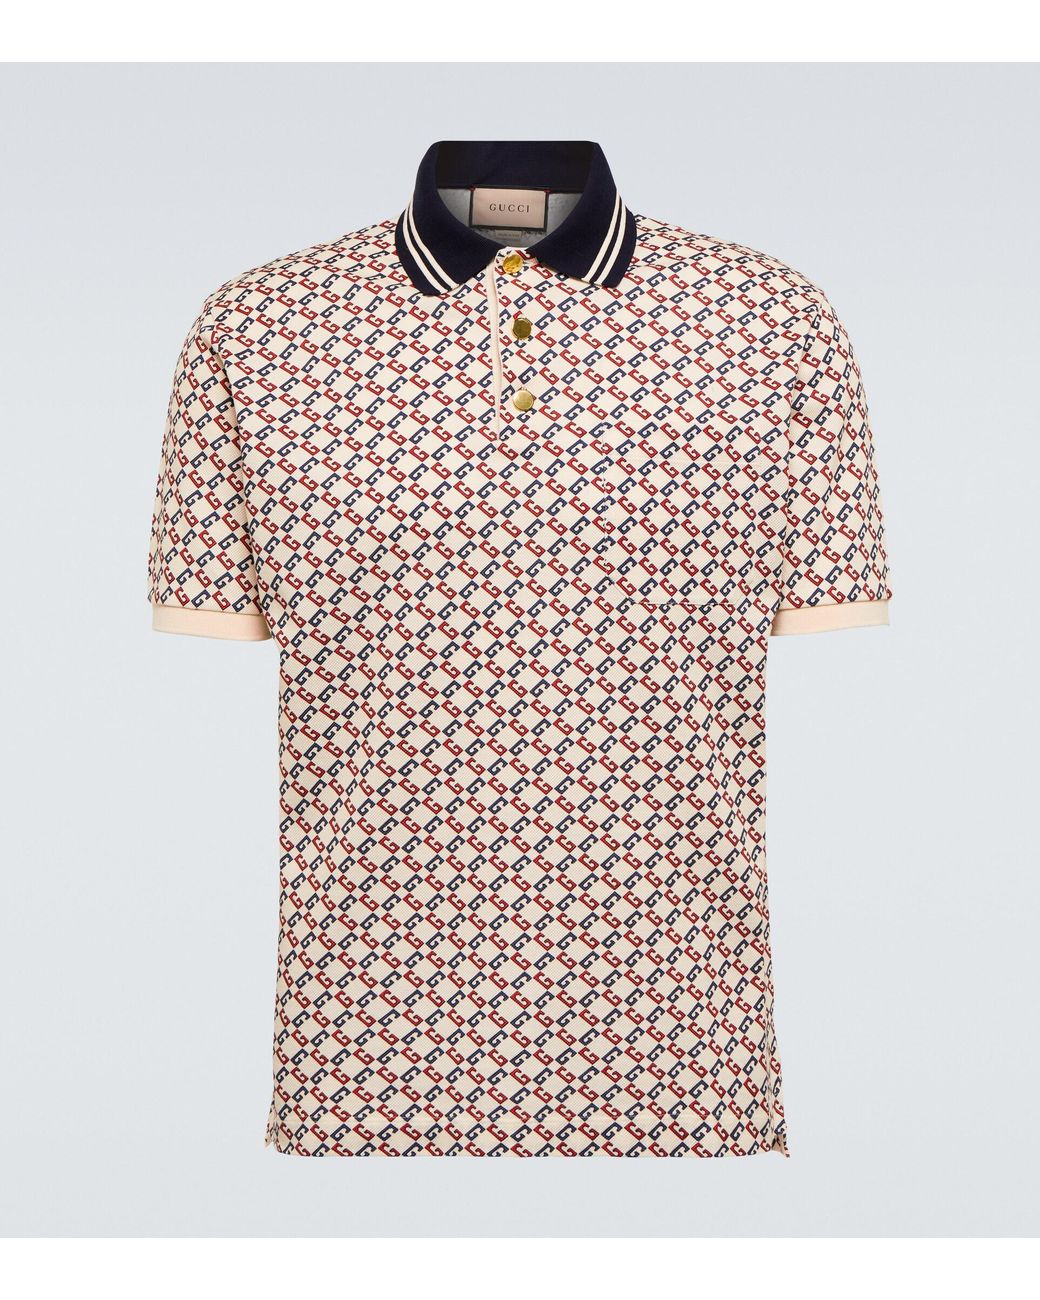 GUCCI GG Crystal Logo Men's Stretch Cotton Polo Authentic LIMITED